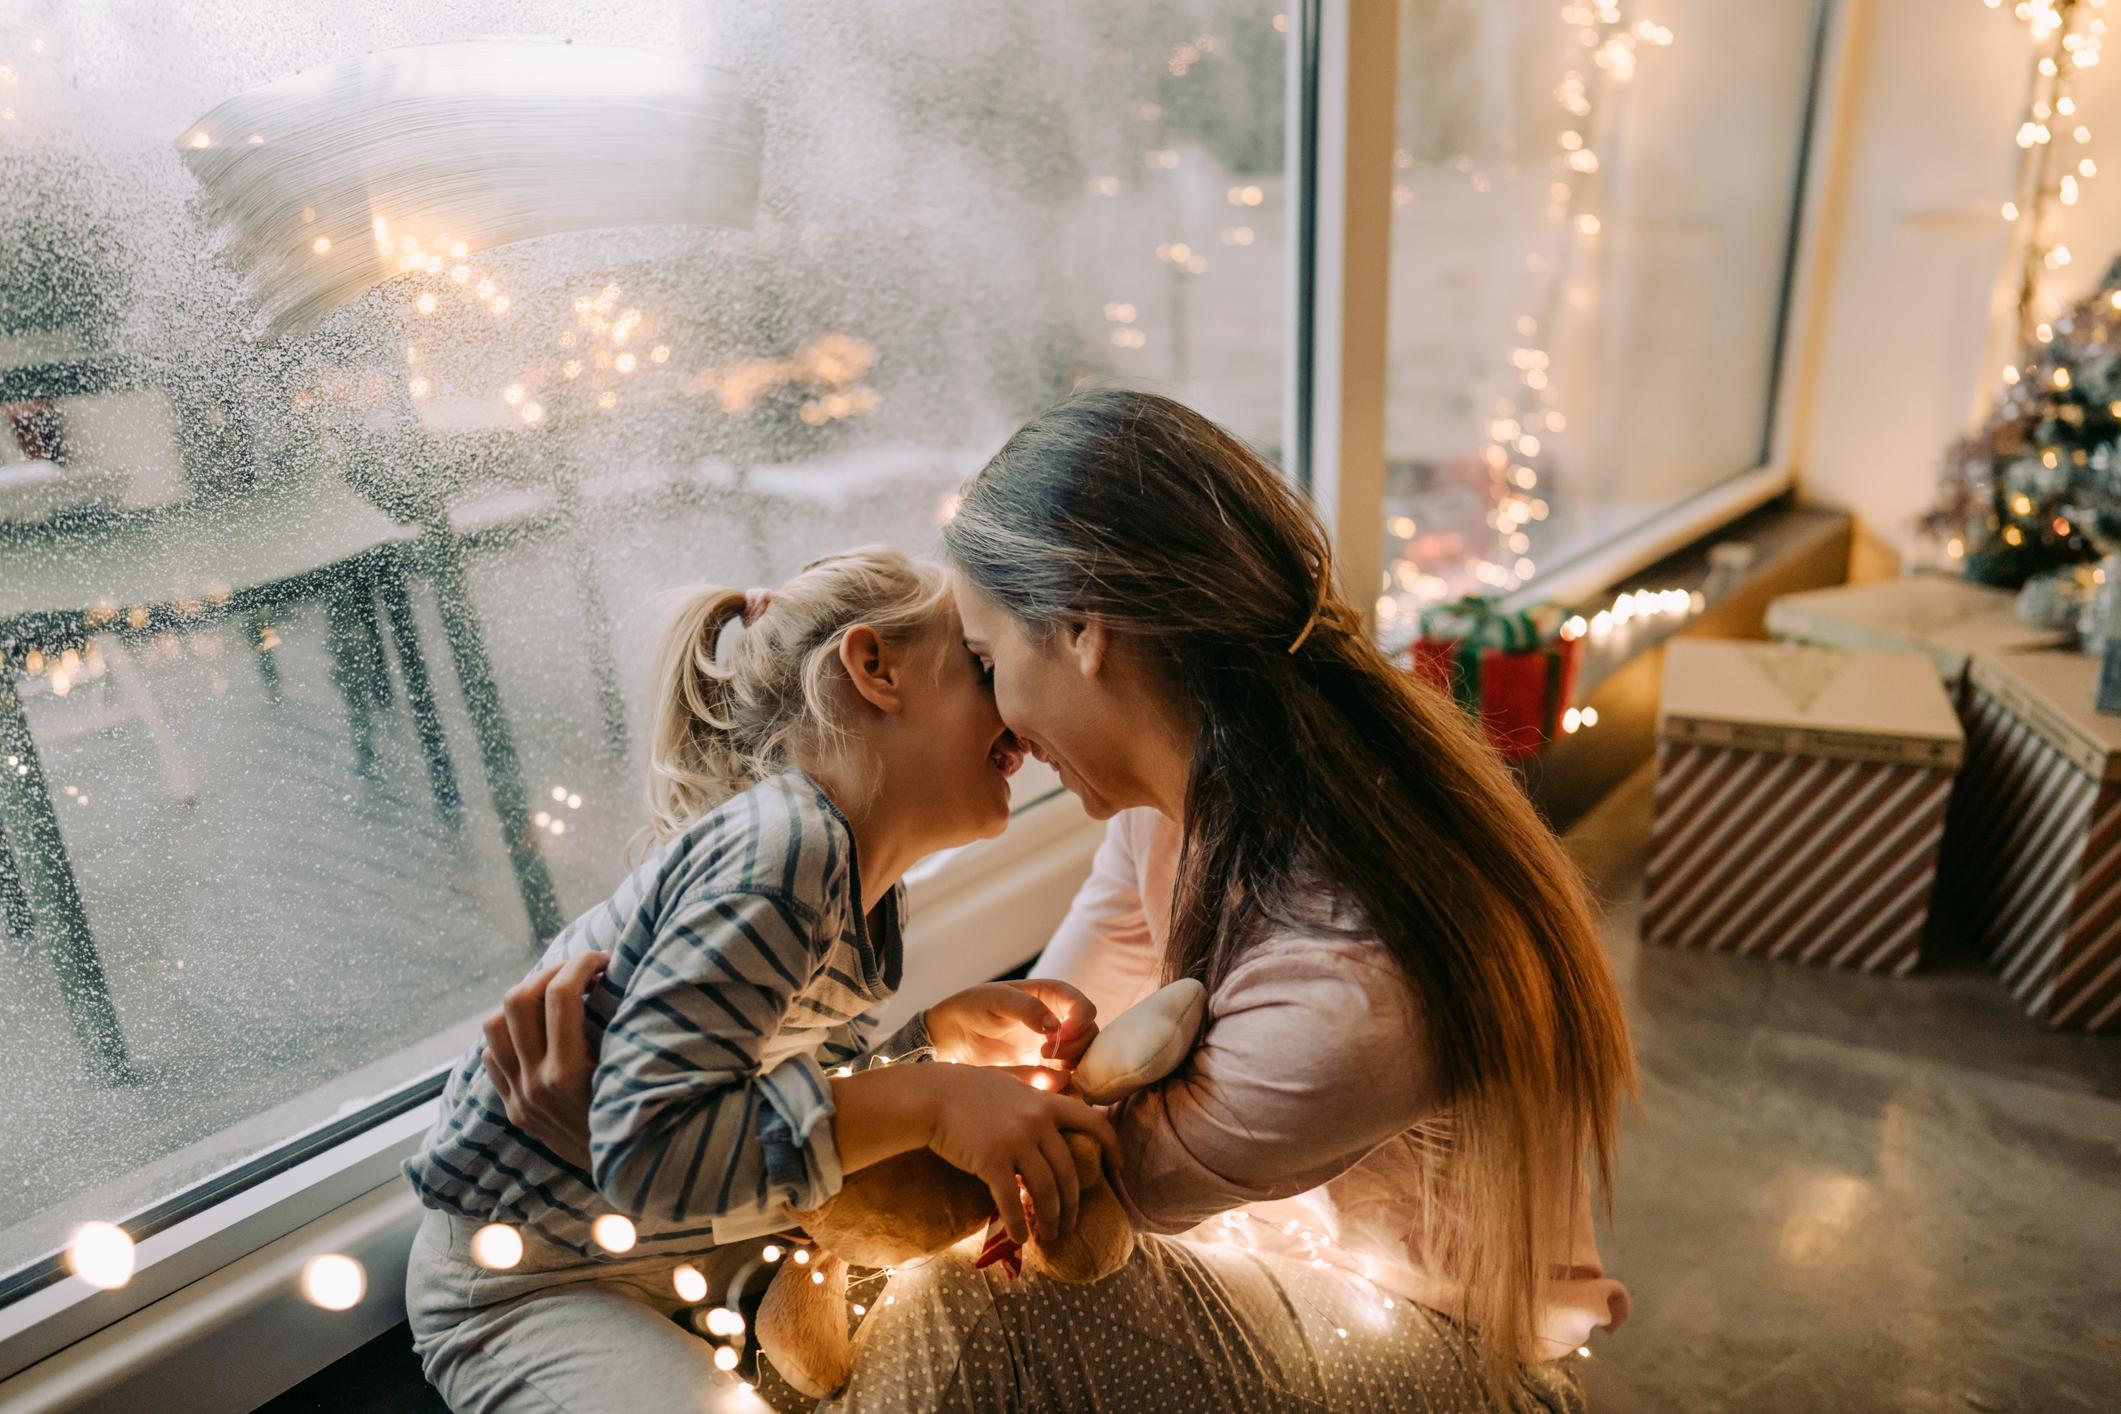 A young Caucasian woman is hugging her daughter by an indoor window with Christmas lights.